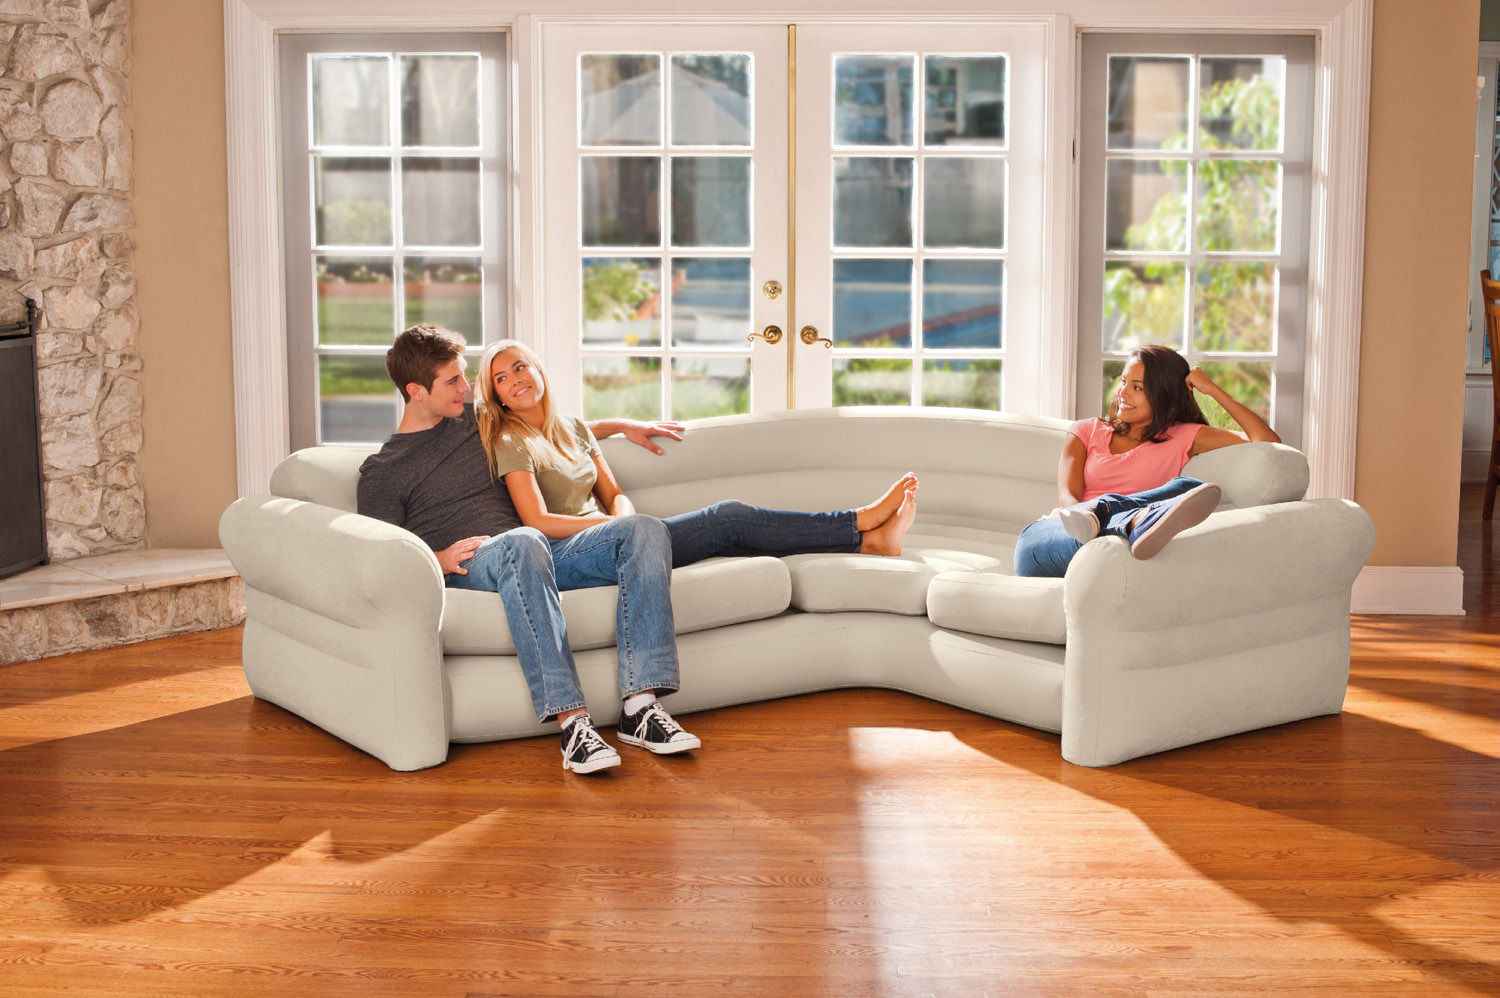 intex inflatable double sofa bed